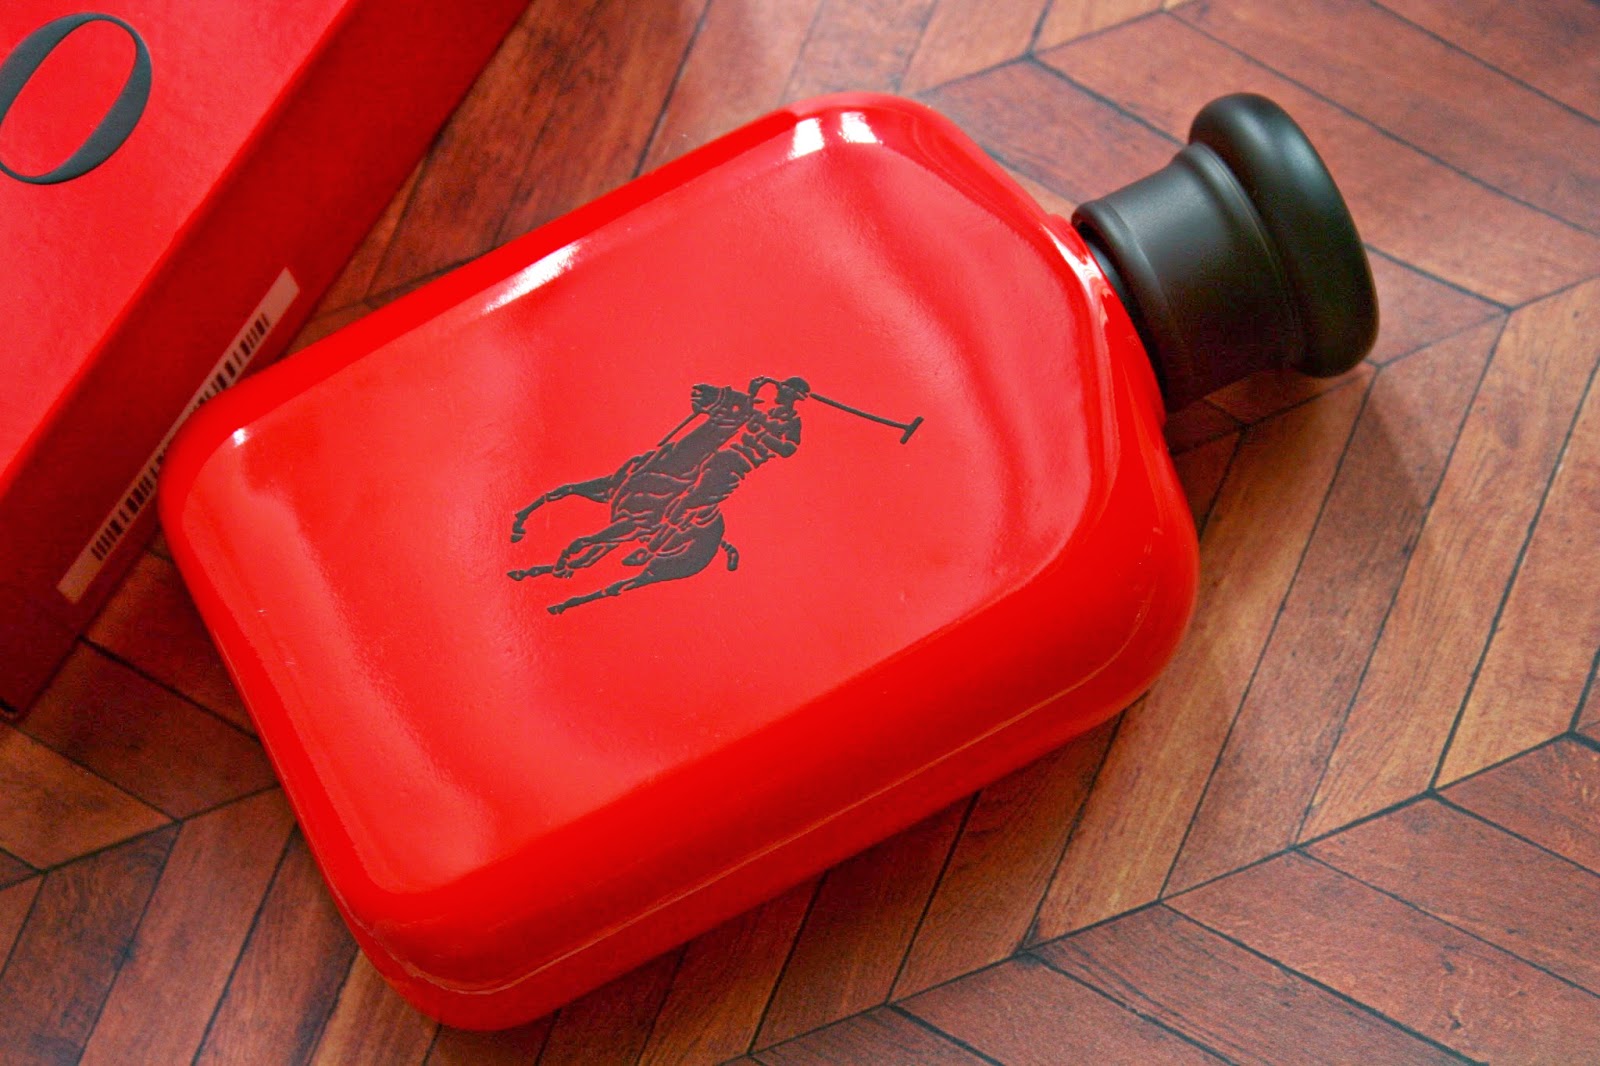 polo red edt 125ml